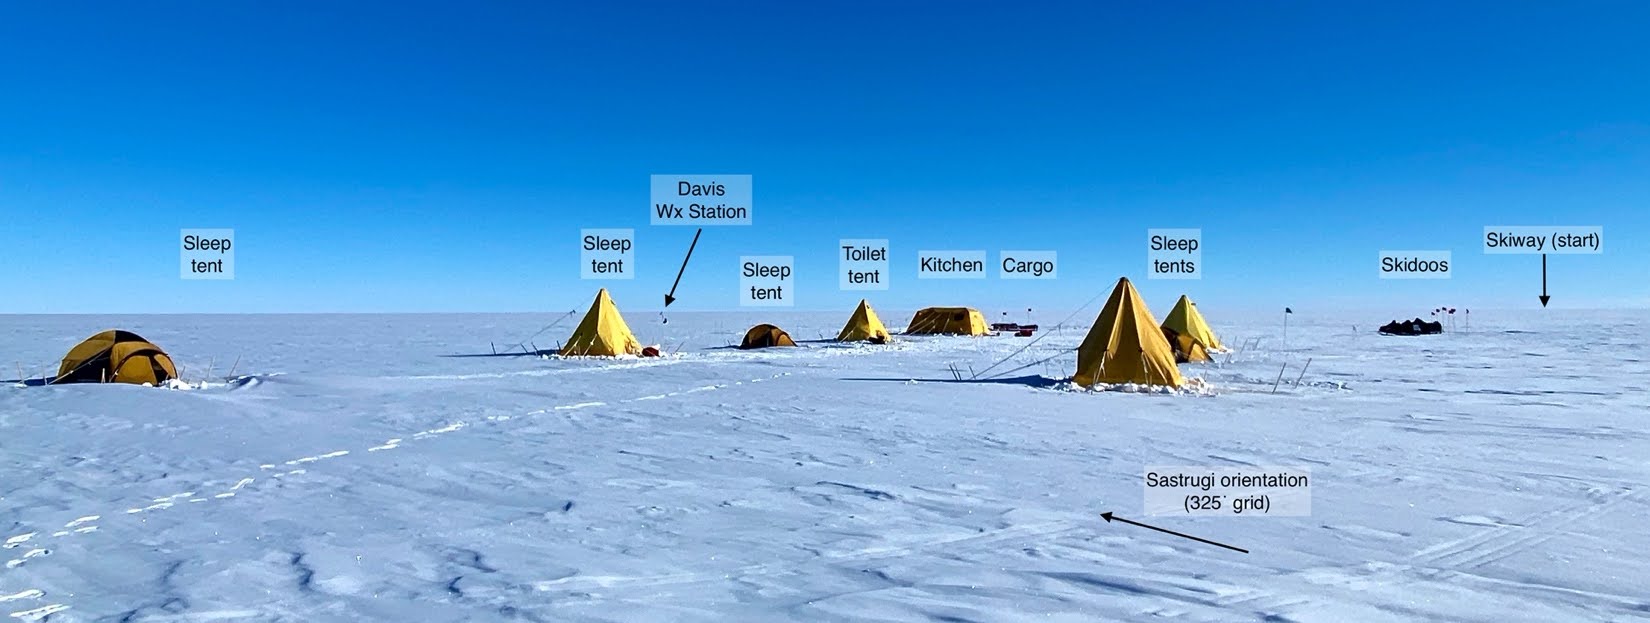 TIME1 Camp layout, after all six team members arrived. Photo by Mike Roberts.